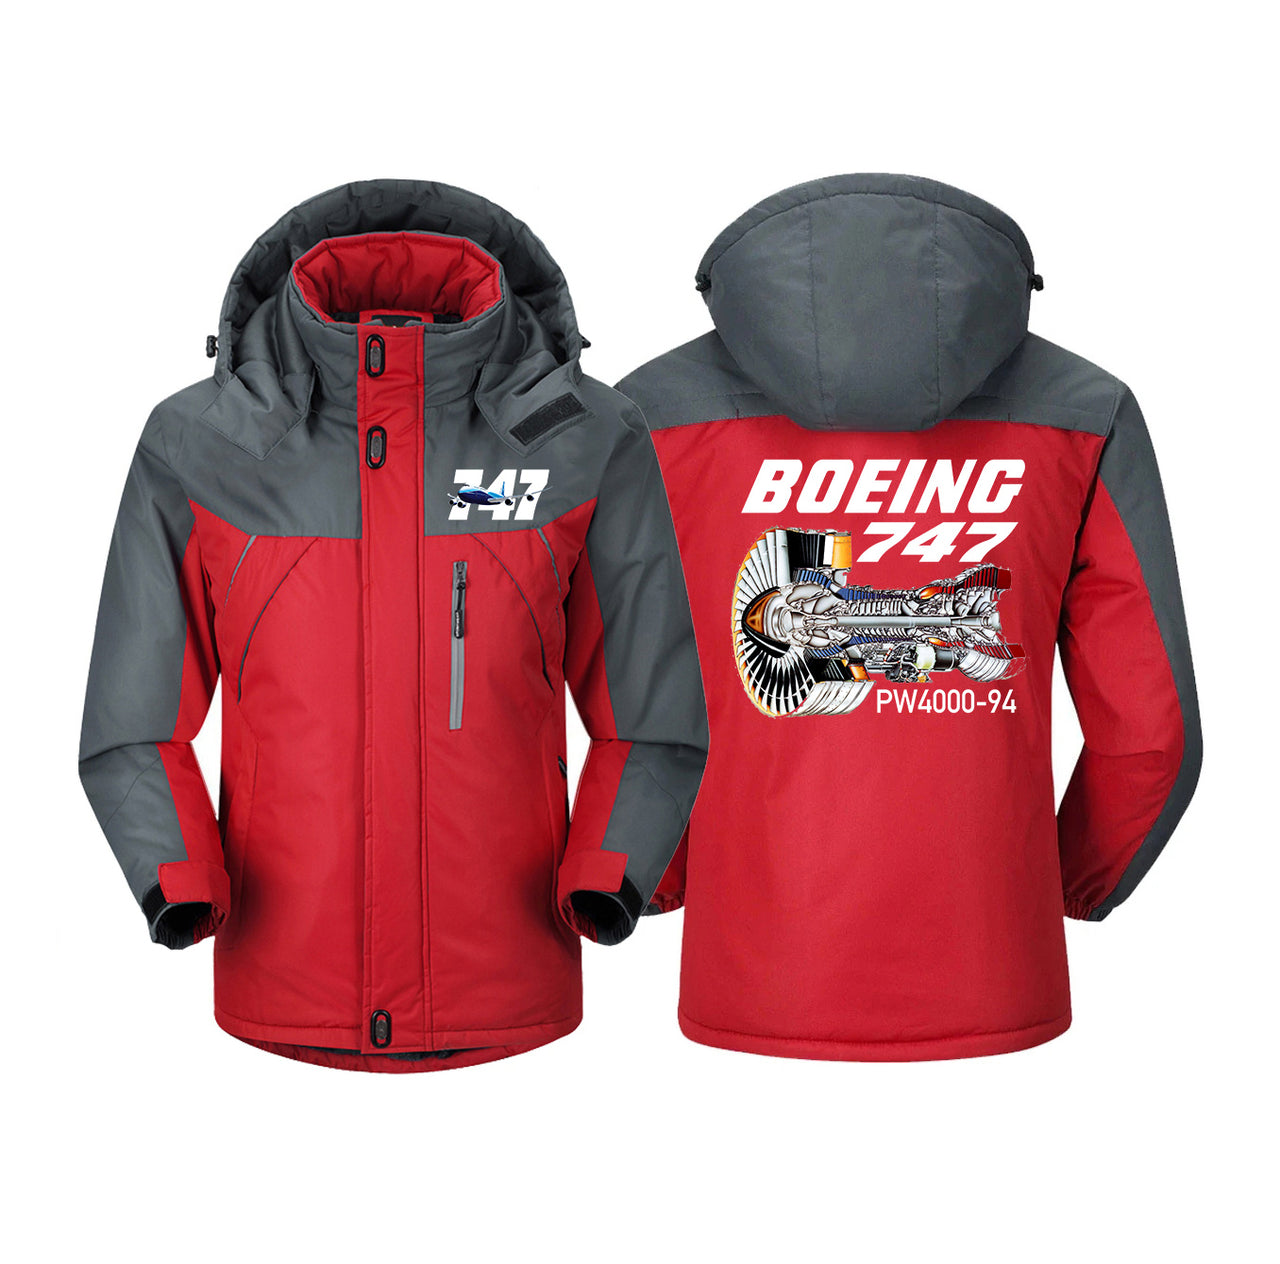 Boeing 747 & PW4000-94 Engine Designed Thick Winter Jackets